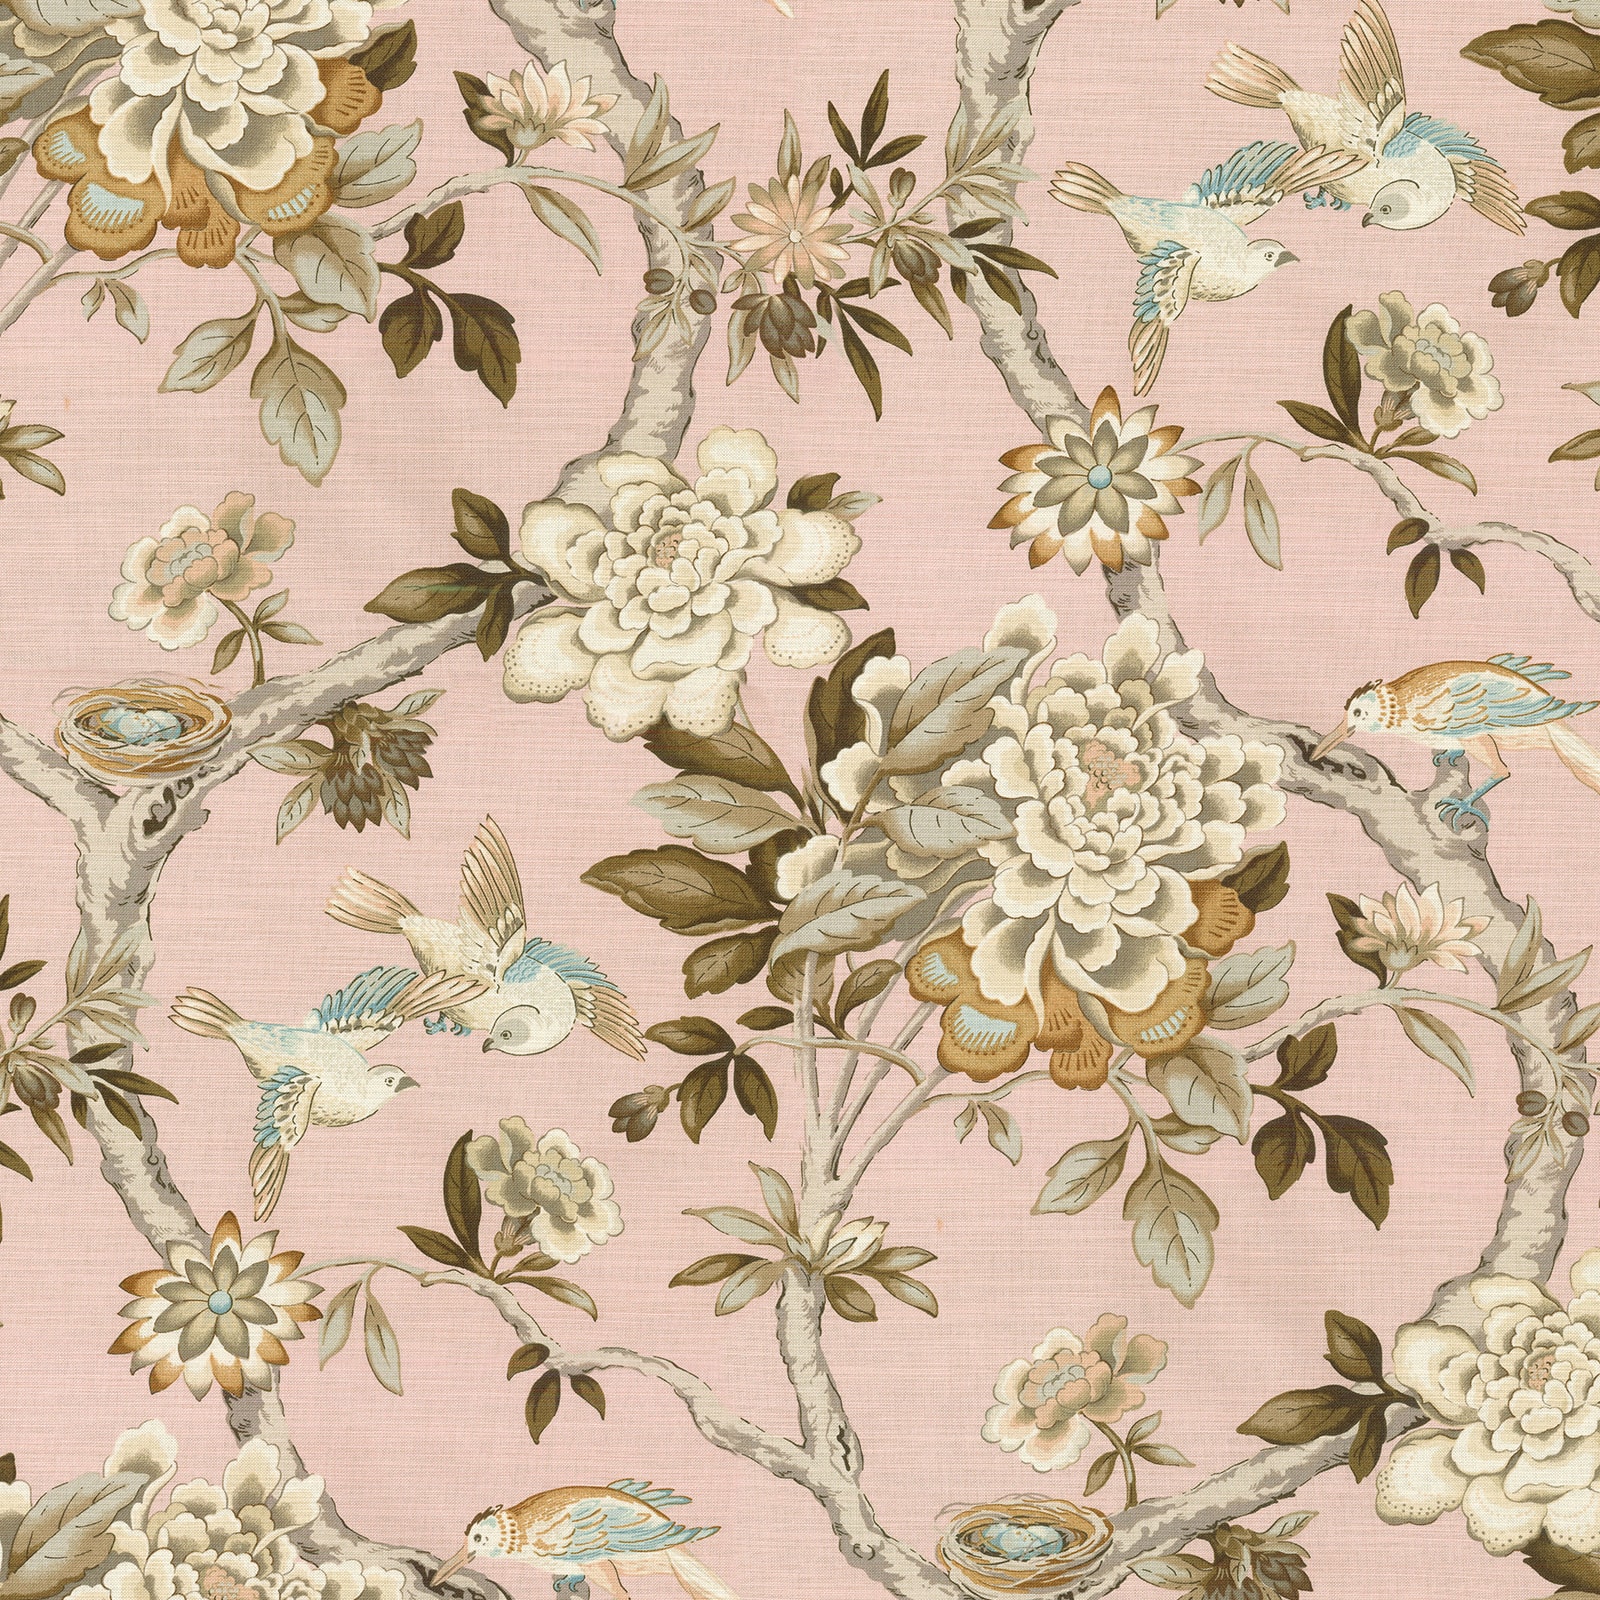 Look For The Waverly Mudan Blush Floral Home Decor Fabric At Michaels